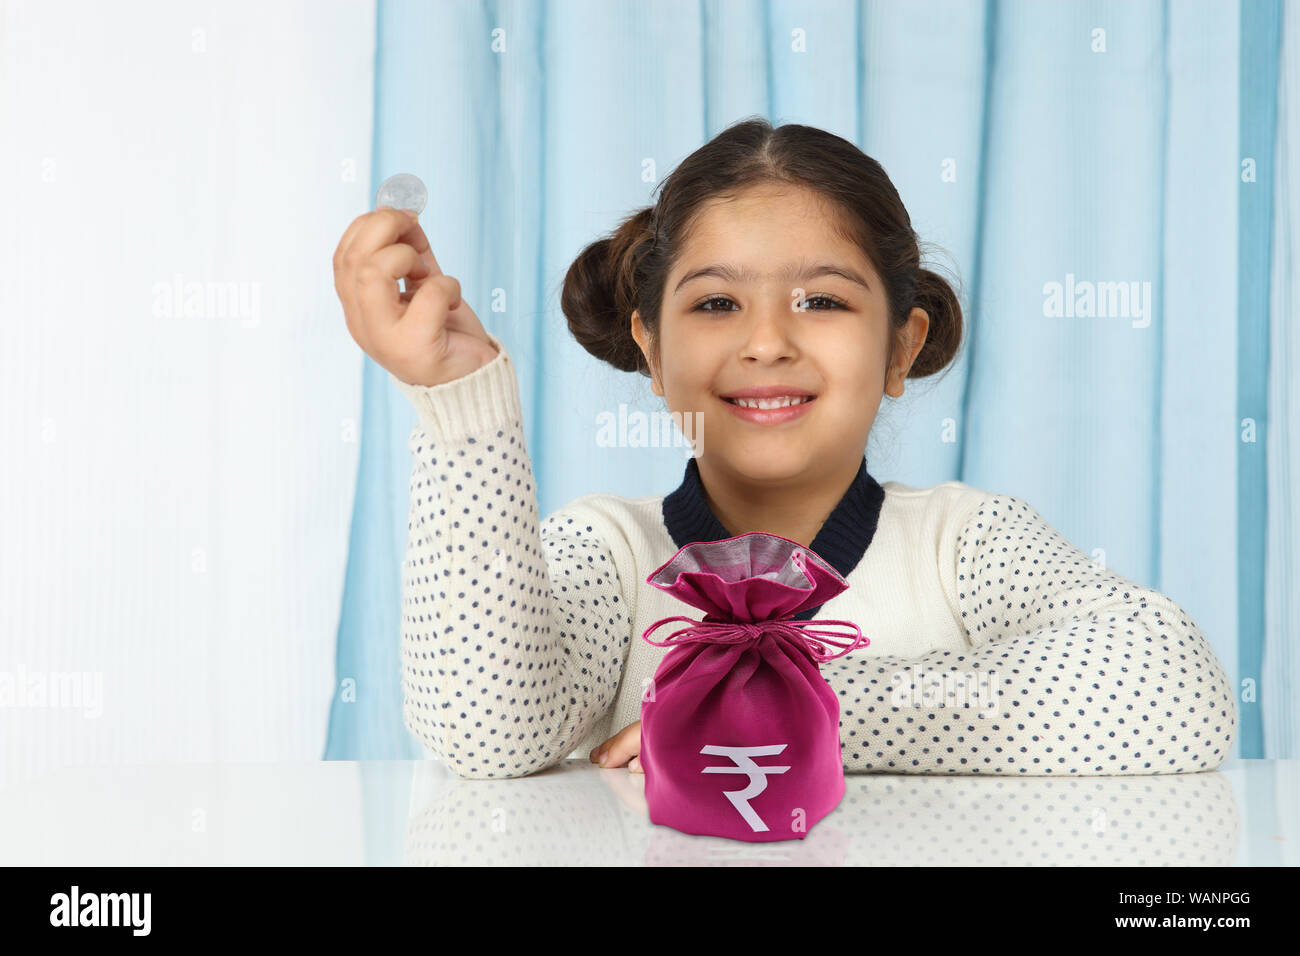 Girl holding a coin and smiling Stock Photo